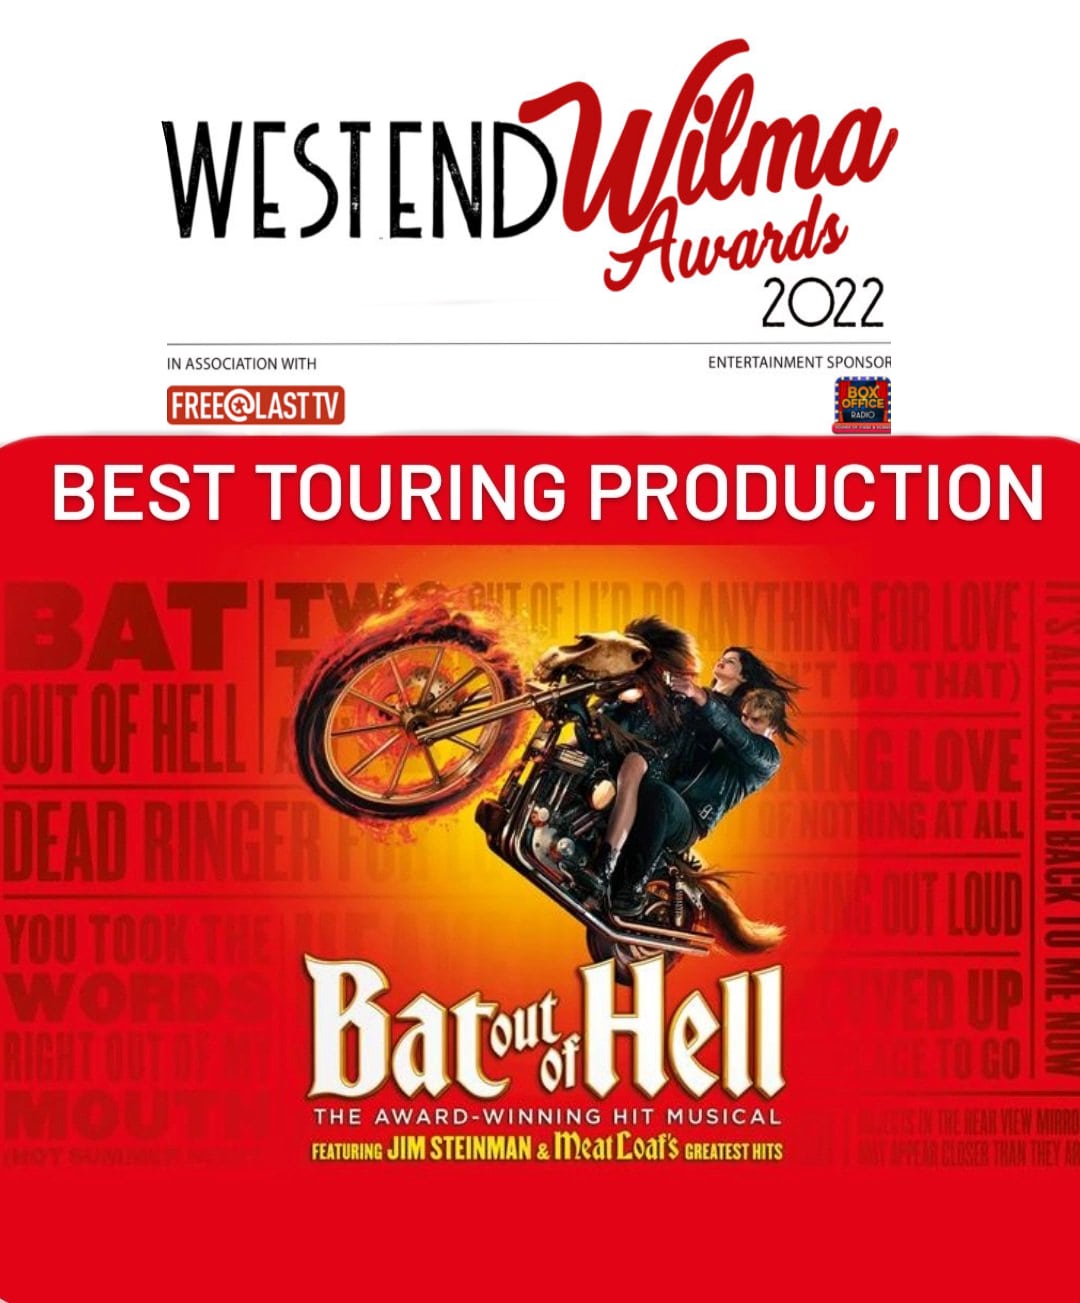 West End Wilma Awards 2022 - Bat Out Of Hell nominated for Best Touring Production